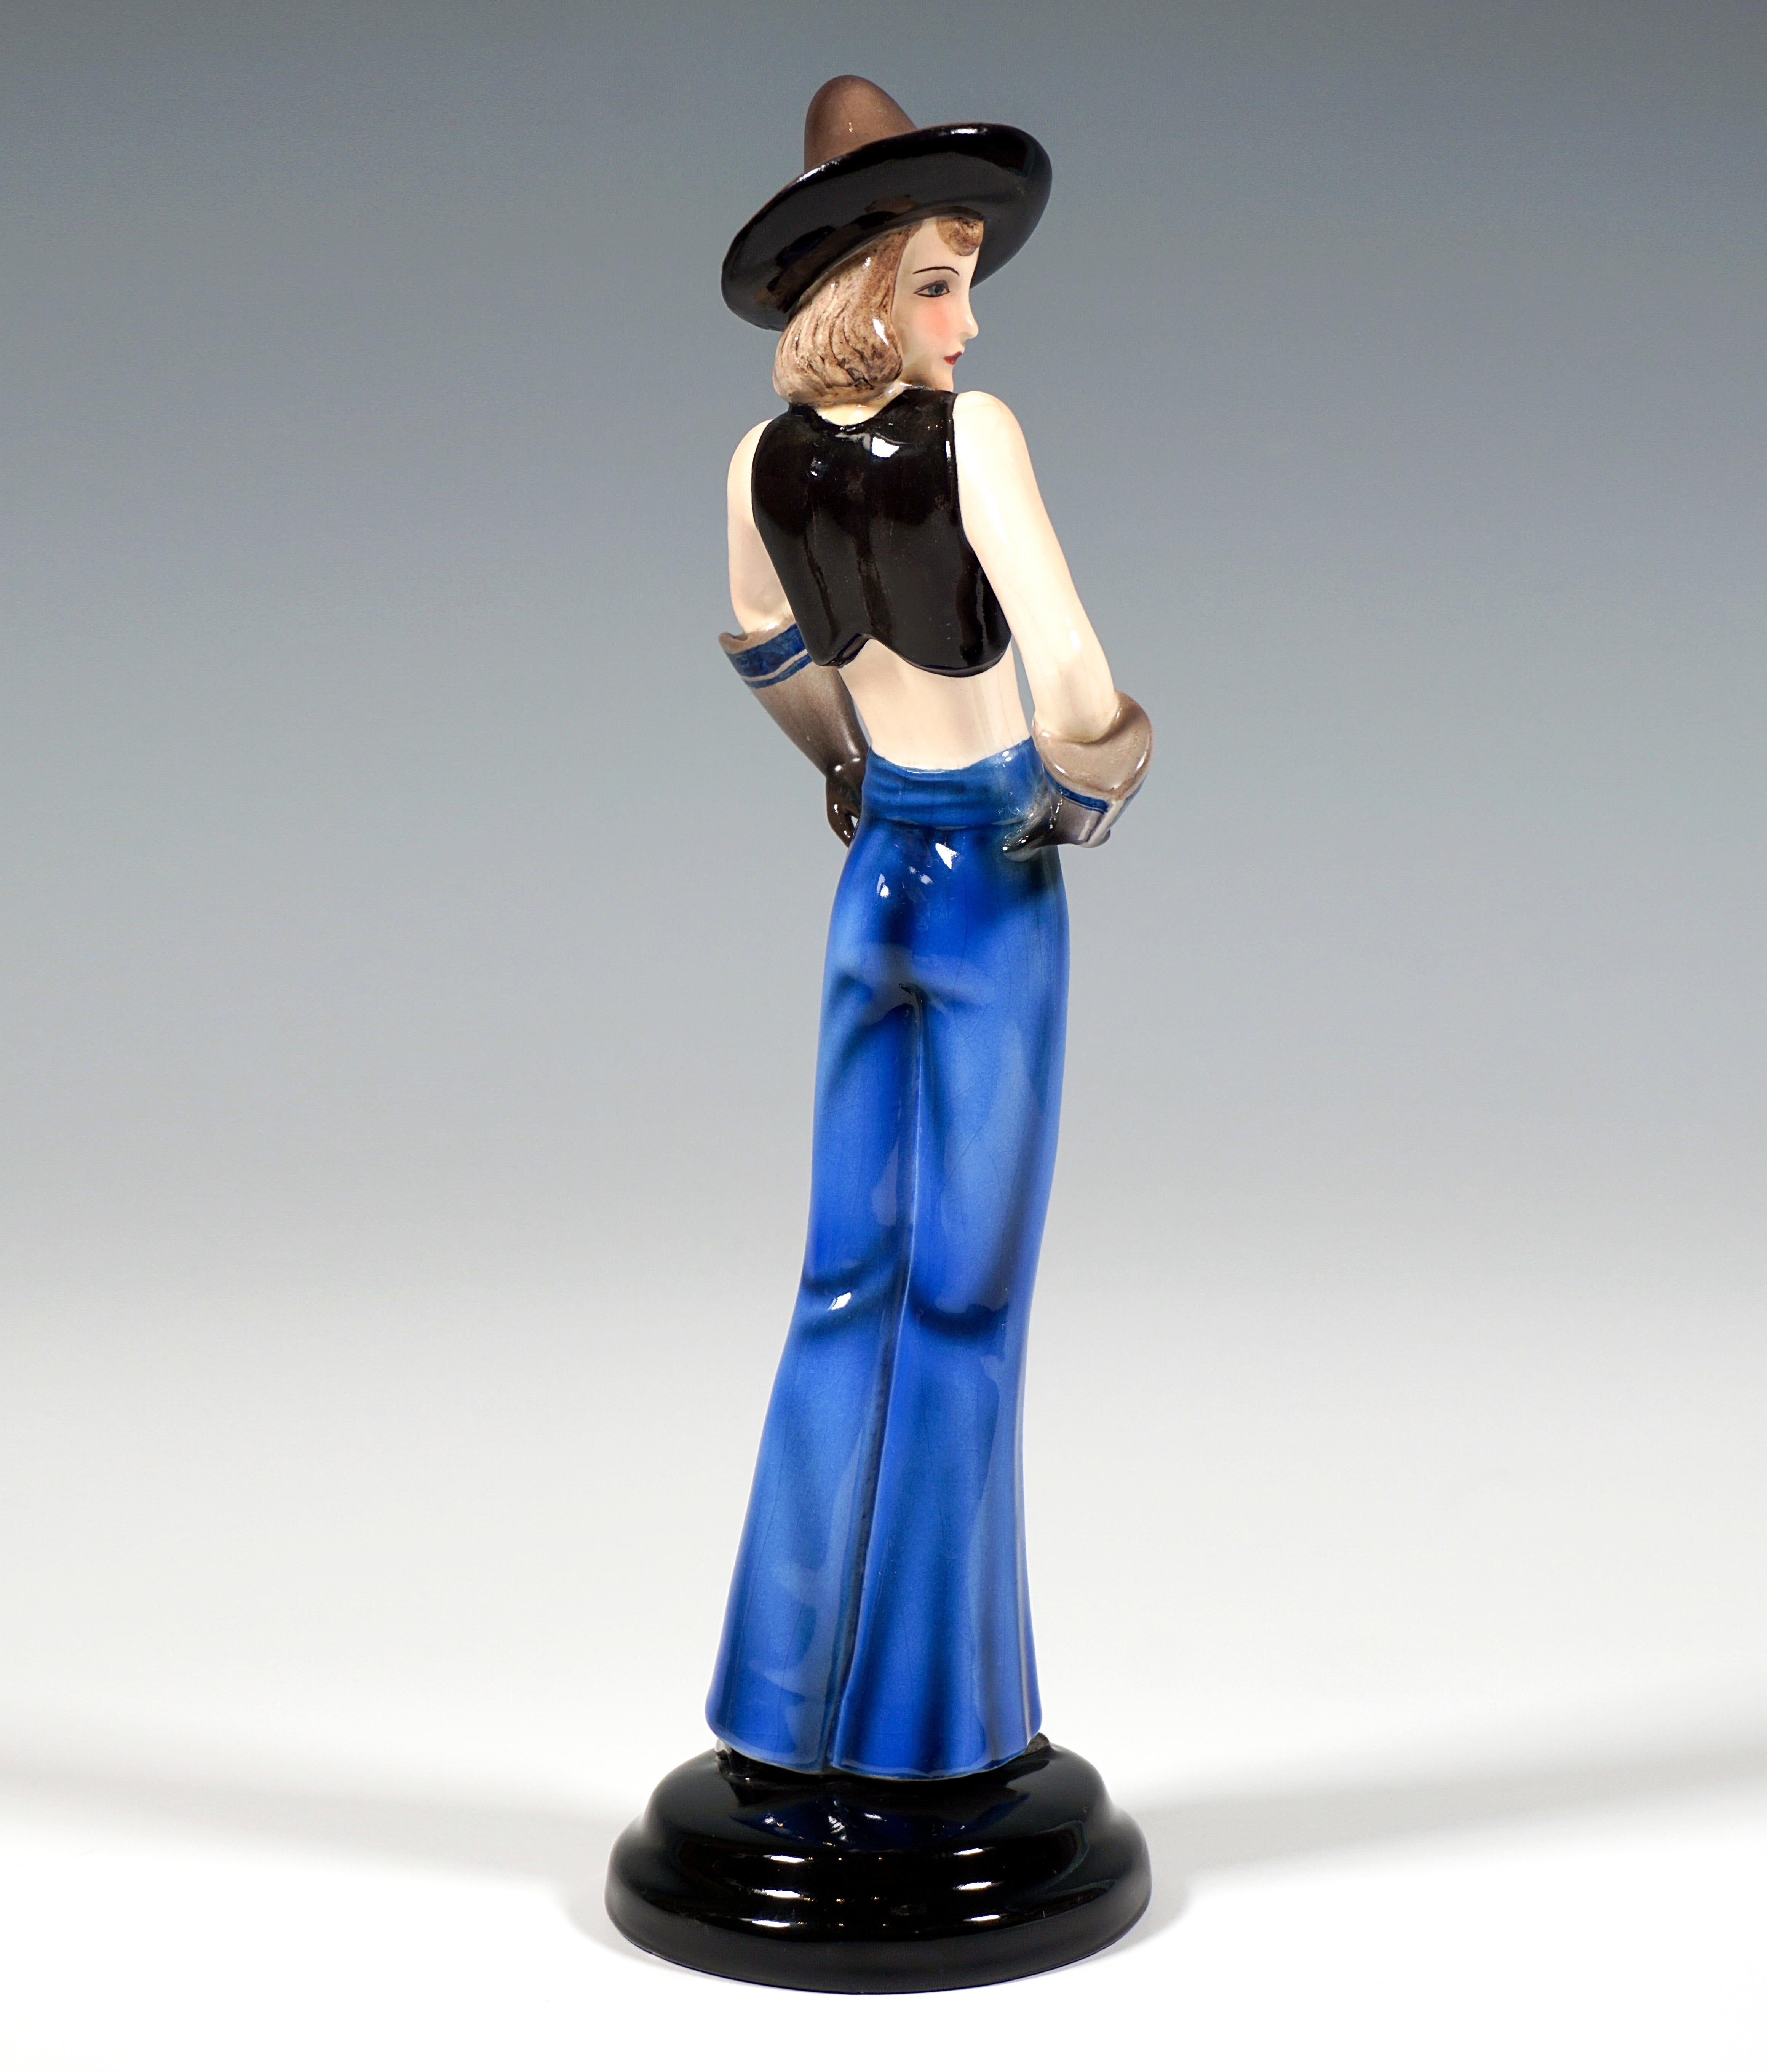 Very rare art ceramic figurine of the 1930s:
Standing girl with a pointed, sombrero-like hat on her chin-length brunette hair, dressed only in a black, short bolero jacket opened wide at the front and long blue flared pants and pointed shoes on her